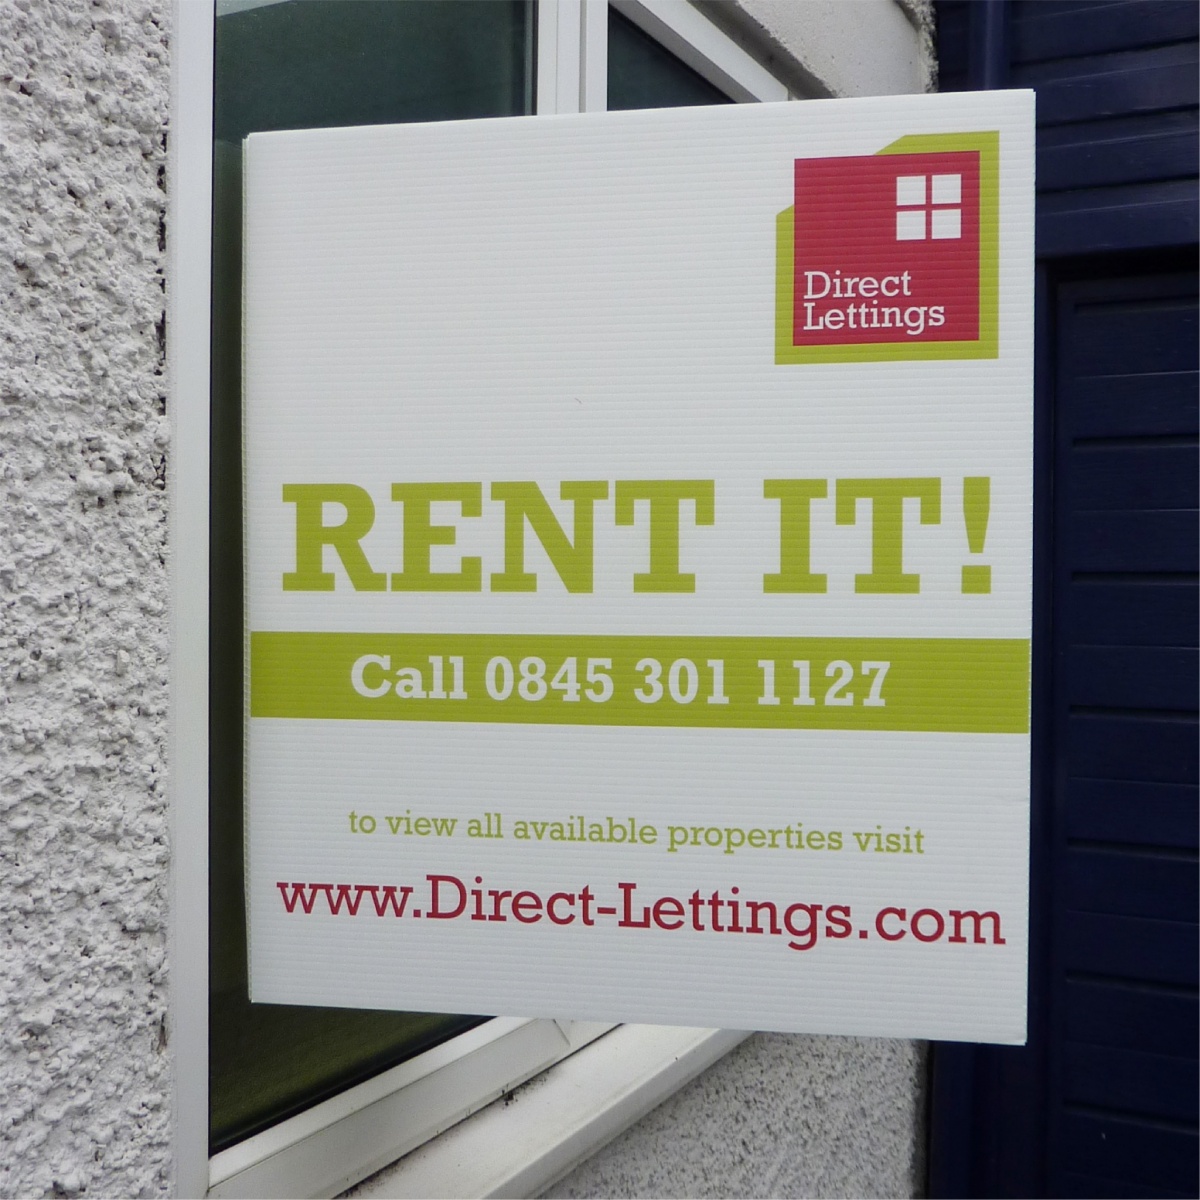 correx board attached to a window advertising a rental property